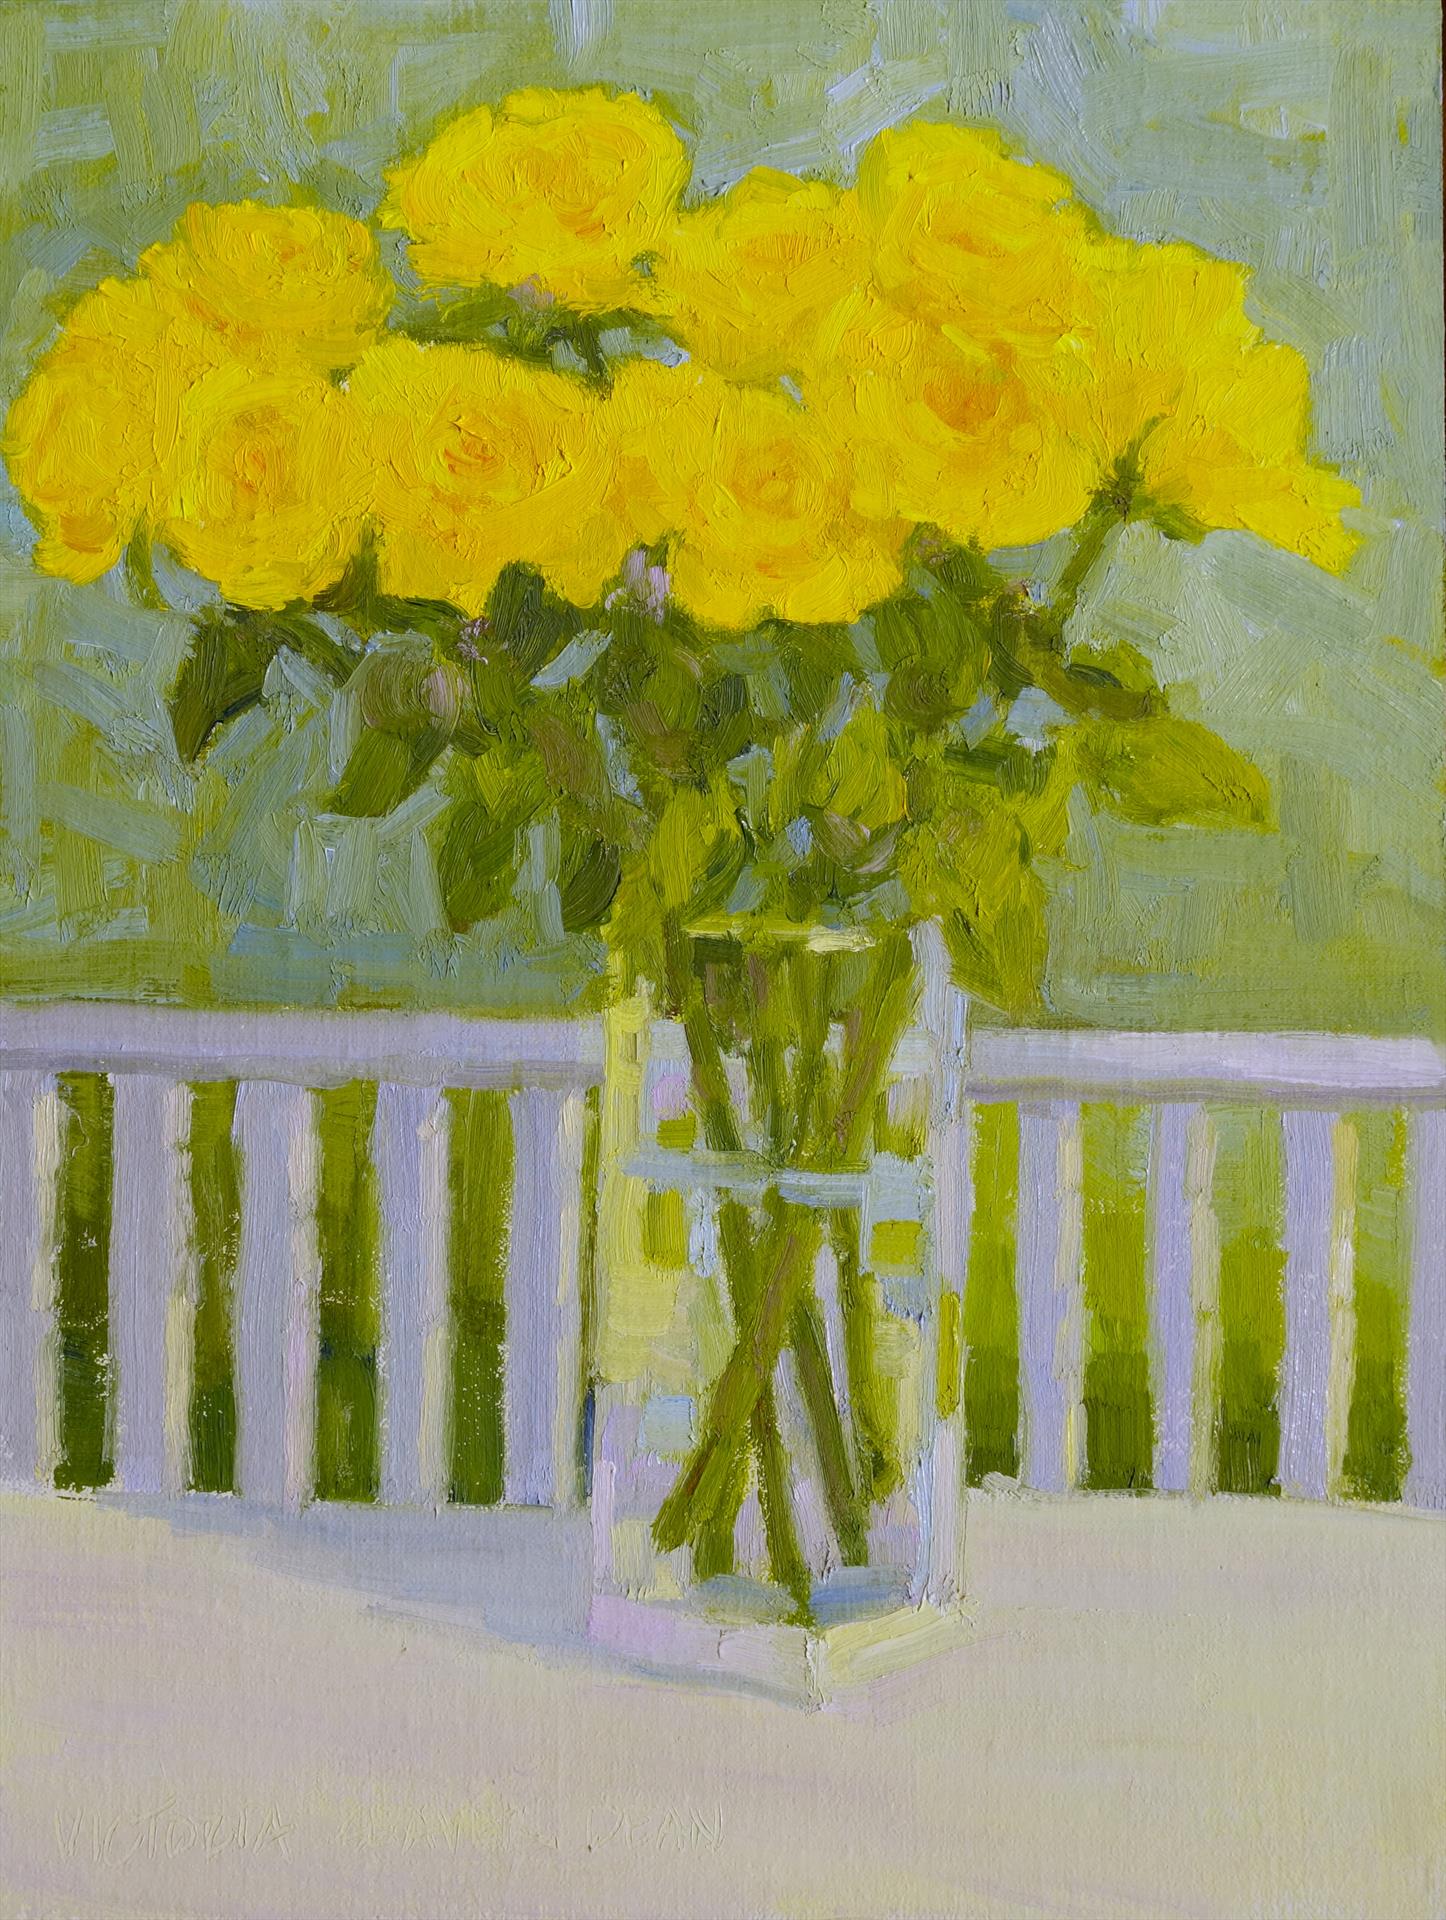 Victoria Dean "Yellow Roses in Glass Vase" Oil 12x9 NFS